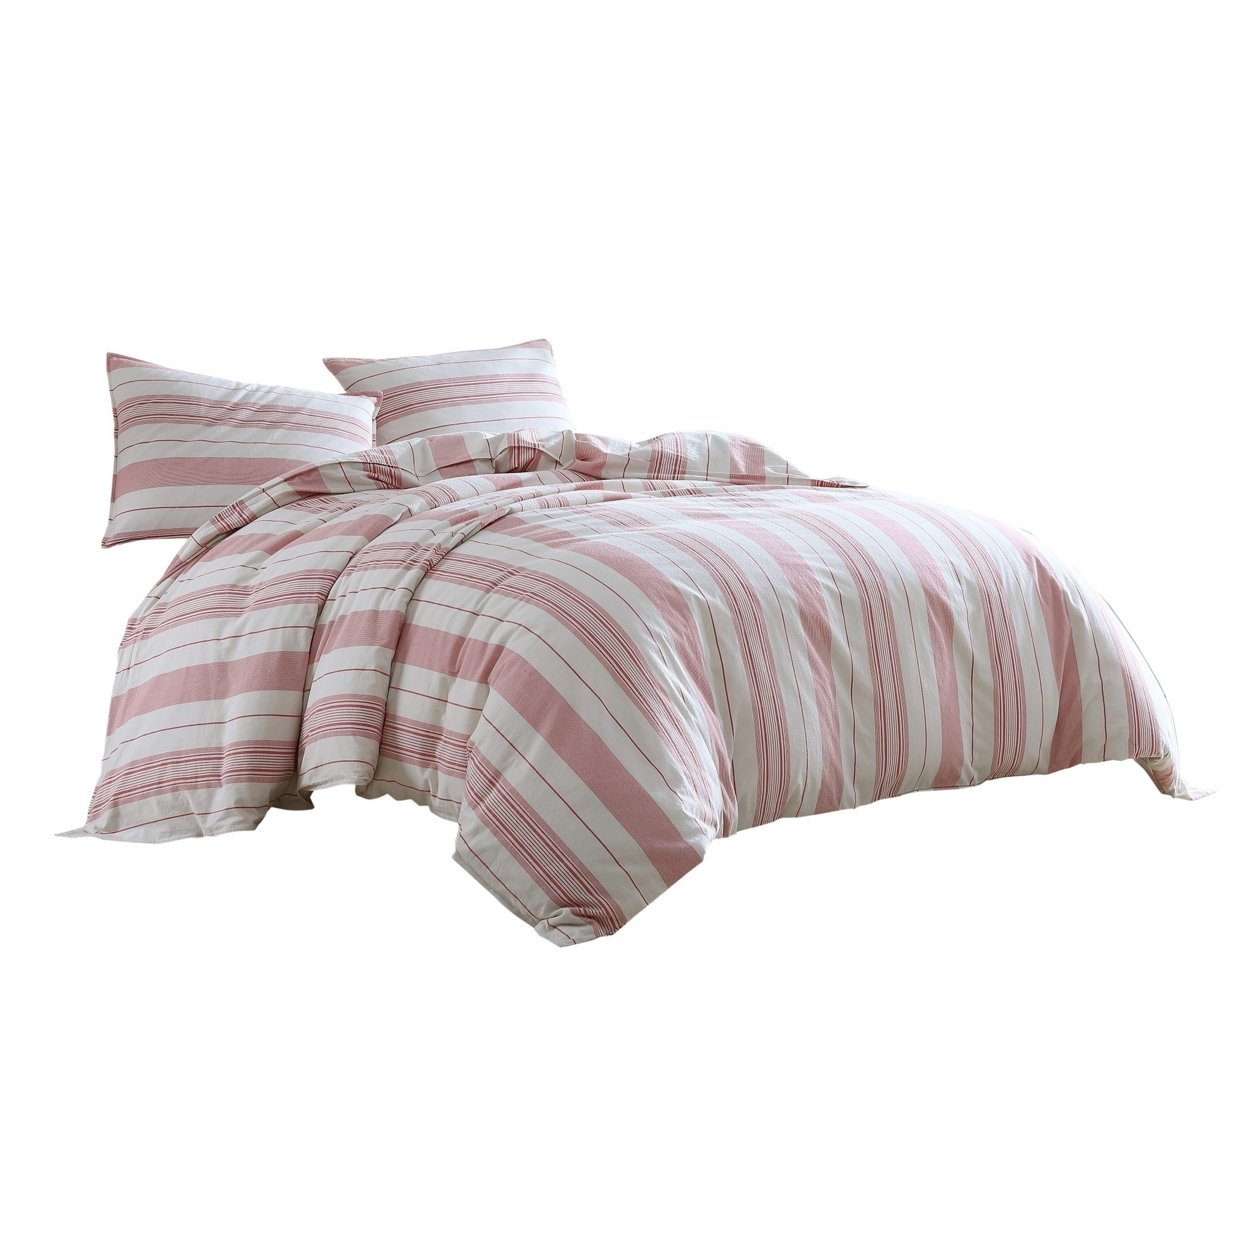 3 Piece Queen Comforter Set With Vertical Stripes Pattern, White And Pink- Saltoro Sherpi